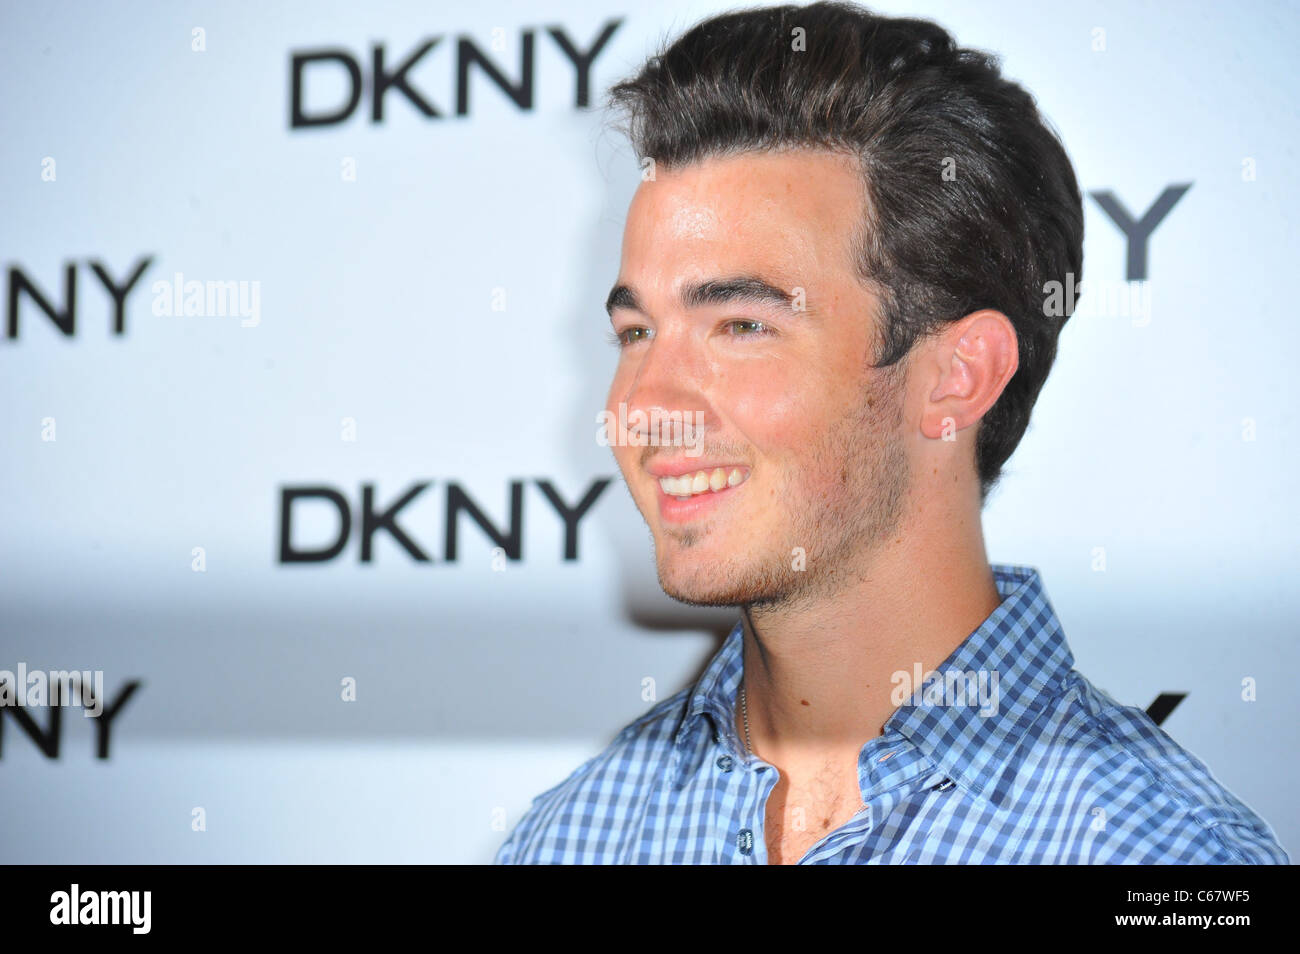 Kevin Jonas at arrivals for DKNY Sunglass Soiree at The Beach, Dream Downtown, New York, NY July 26, 2011. Photo By: Gregorio T. Binuya/Everett Collection Stock Photo